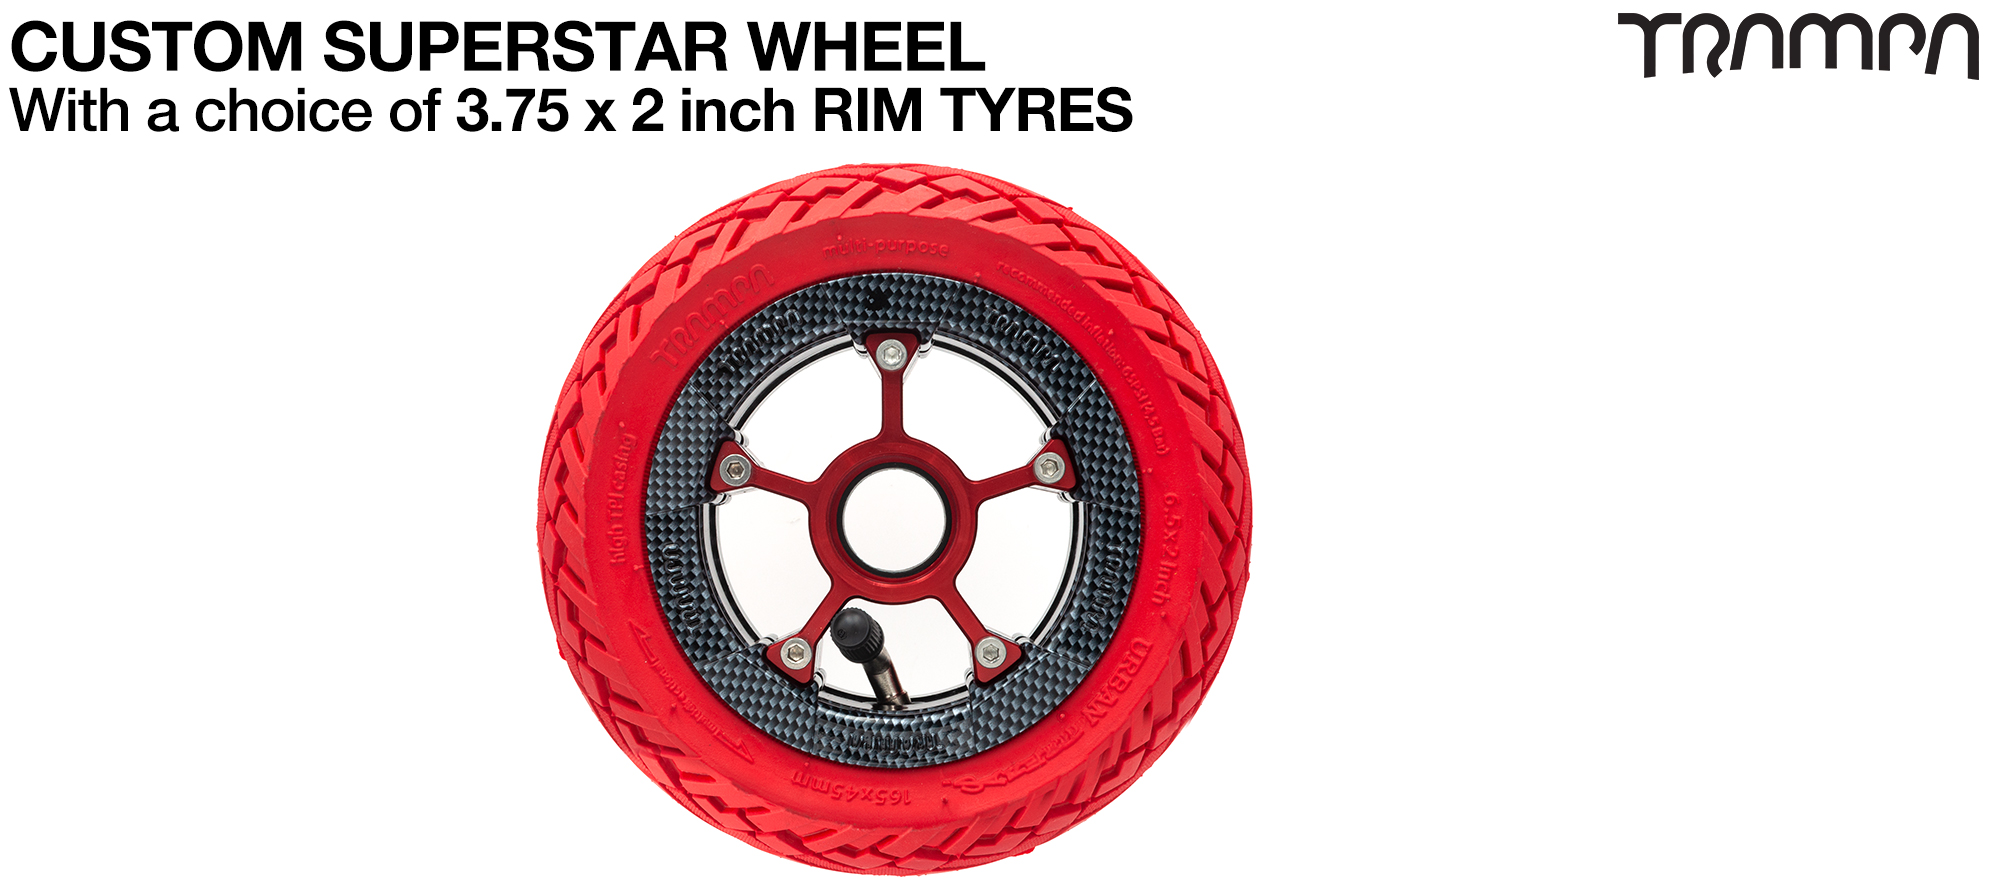 SUPERSTAR WHEEL showing with 6 Inch URBAN Tyre 3.75 x 2 Inch! Build the SUPERSTAR wheel of your dreams!! Any combination possible up to 8 inch Tyres 